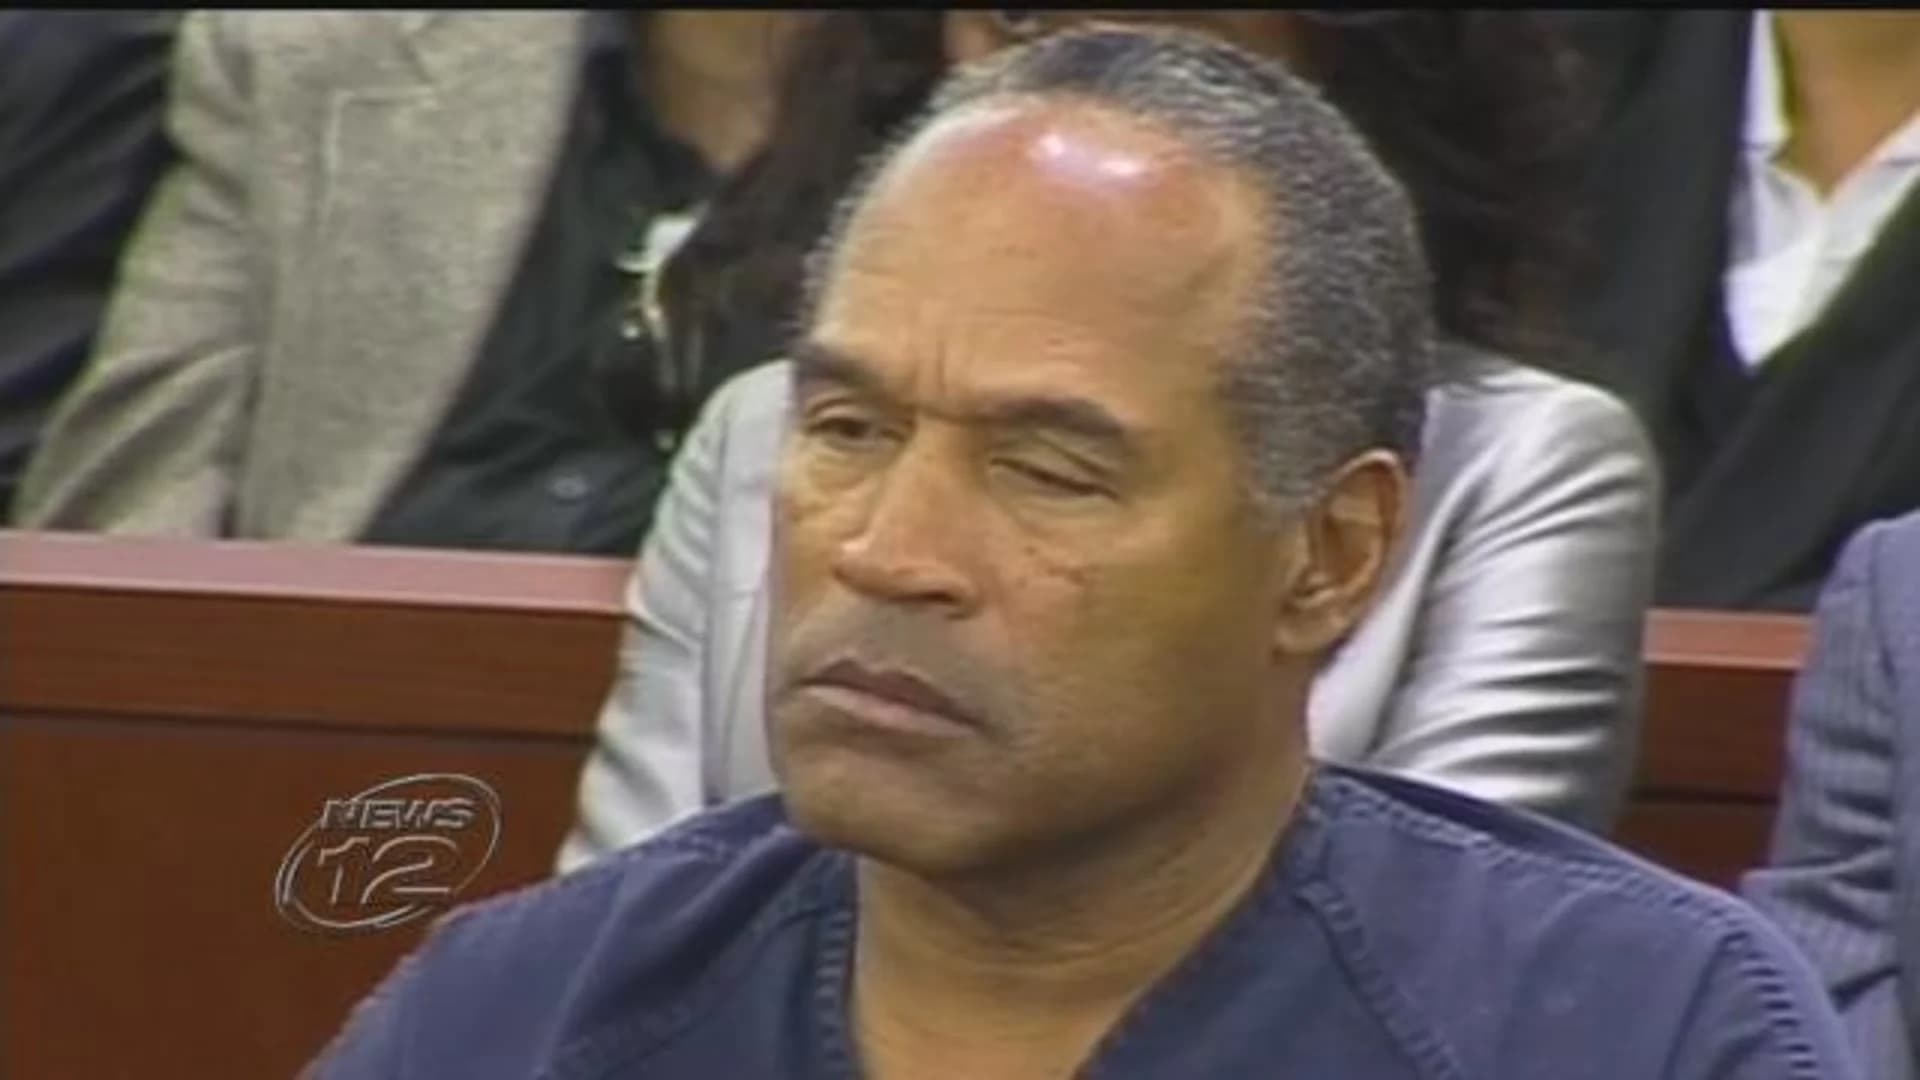 OJ Simpson makes case for his freedom on live TV